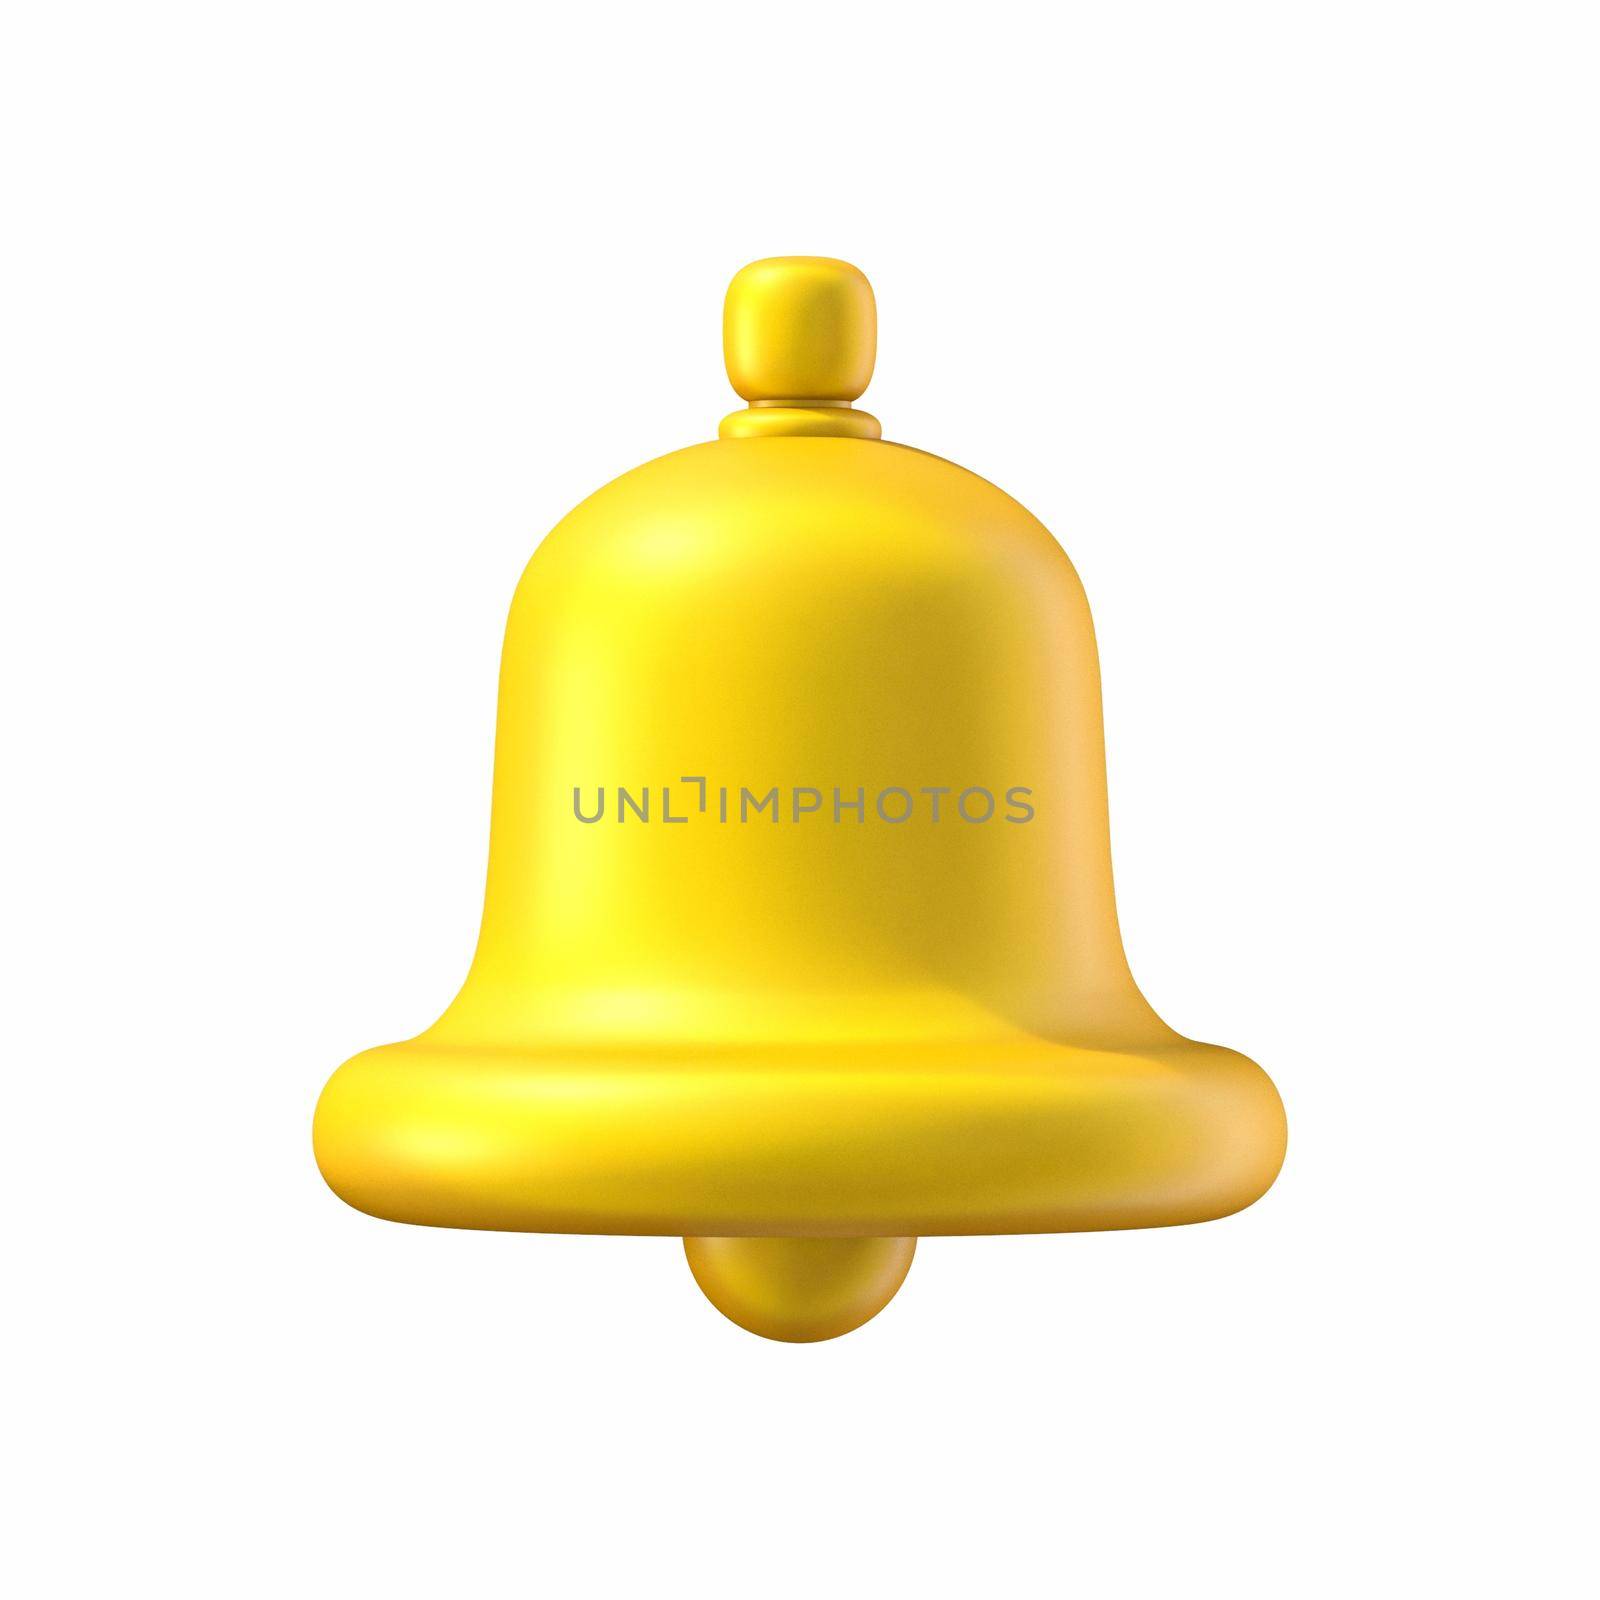 Yellow notification bell Front view 3D rendering illustration isolated on white background